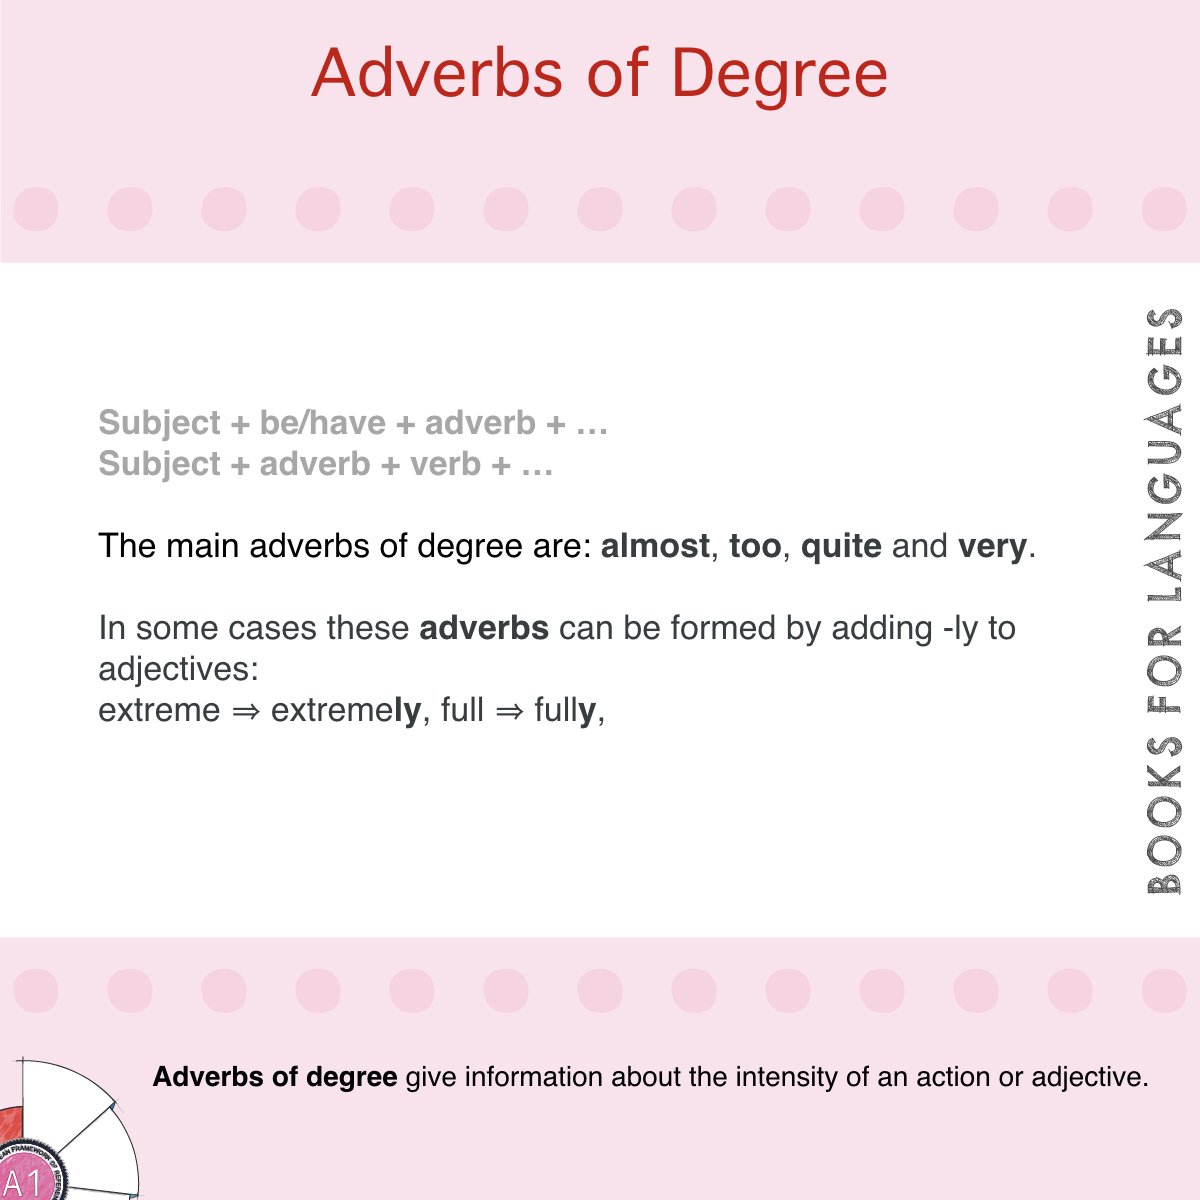 adverb-of-degree-examples-list-sentences-what-are-examples-of-adverbs